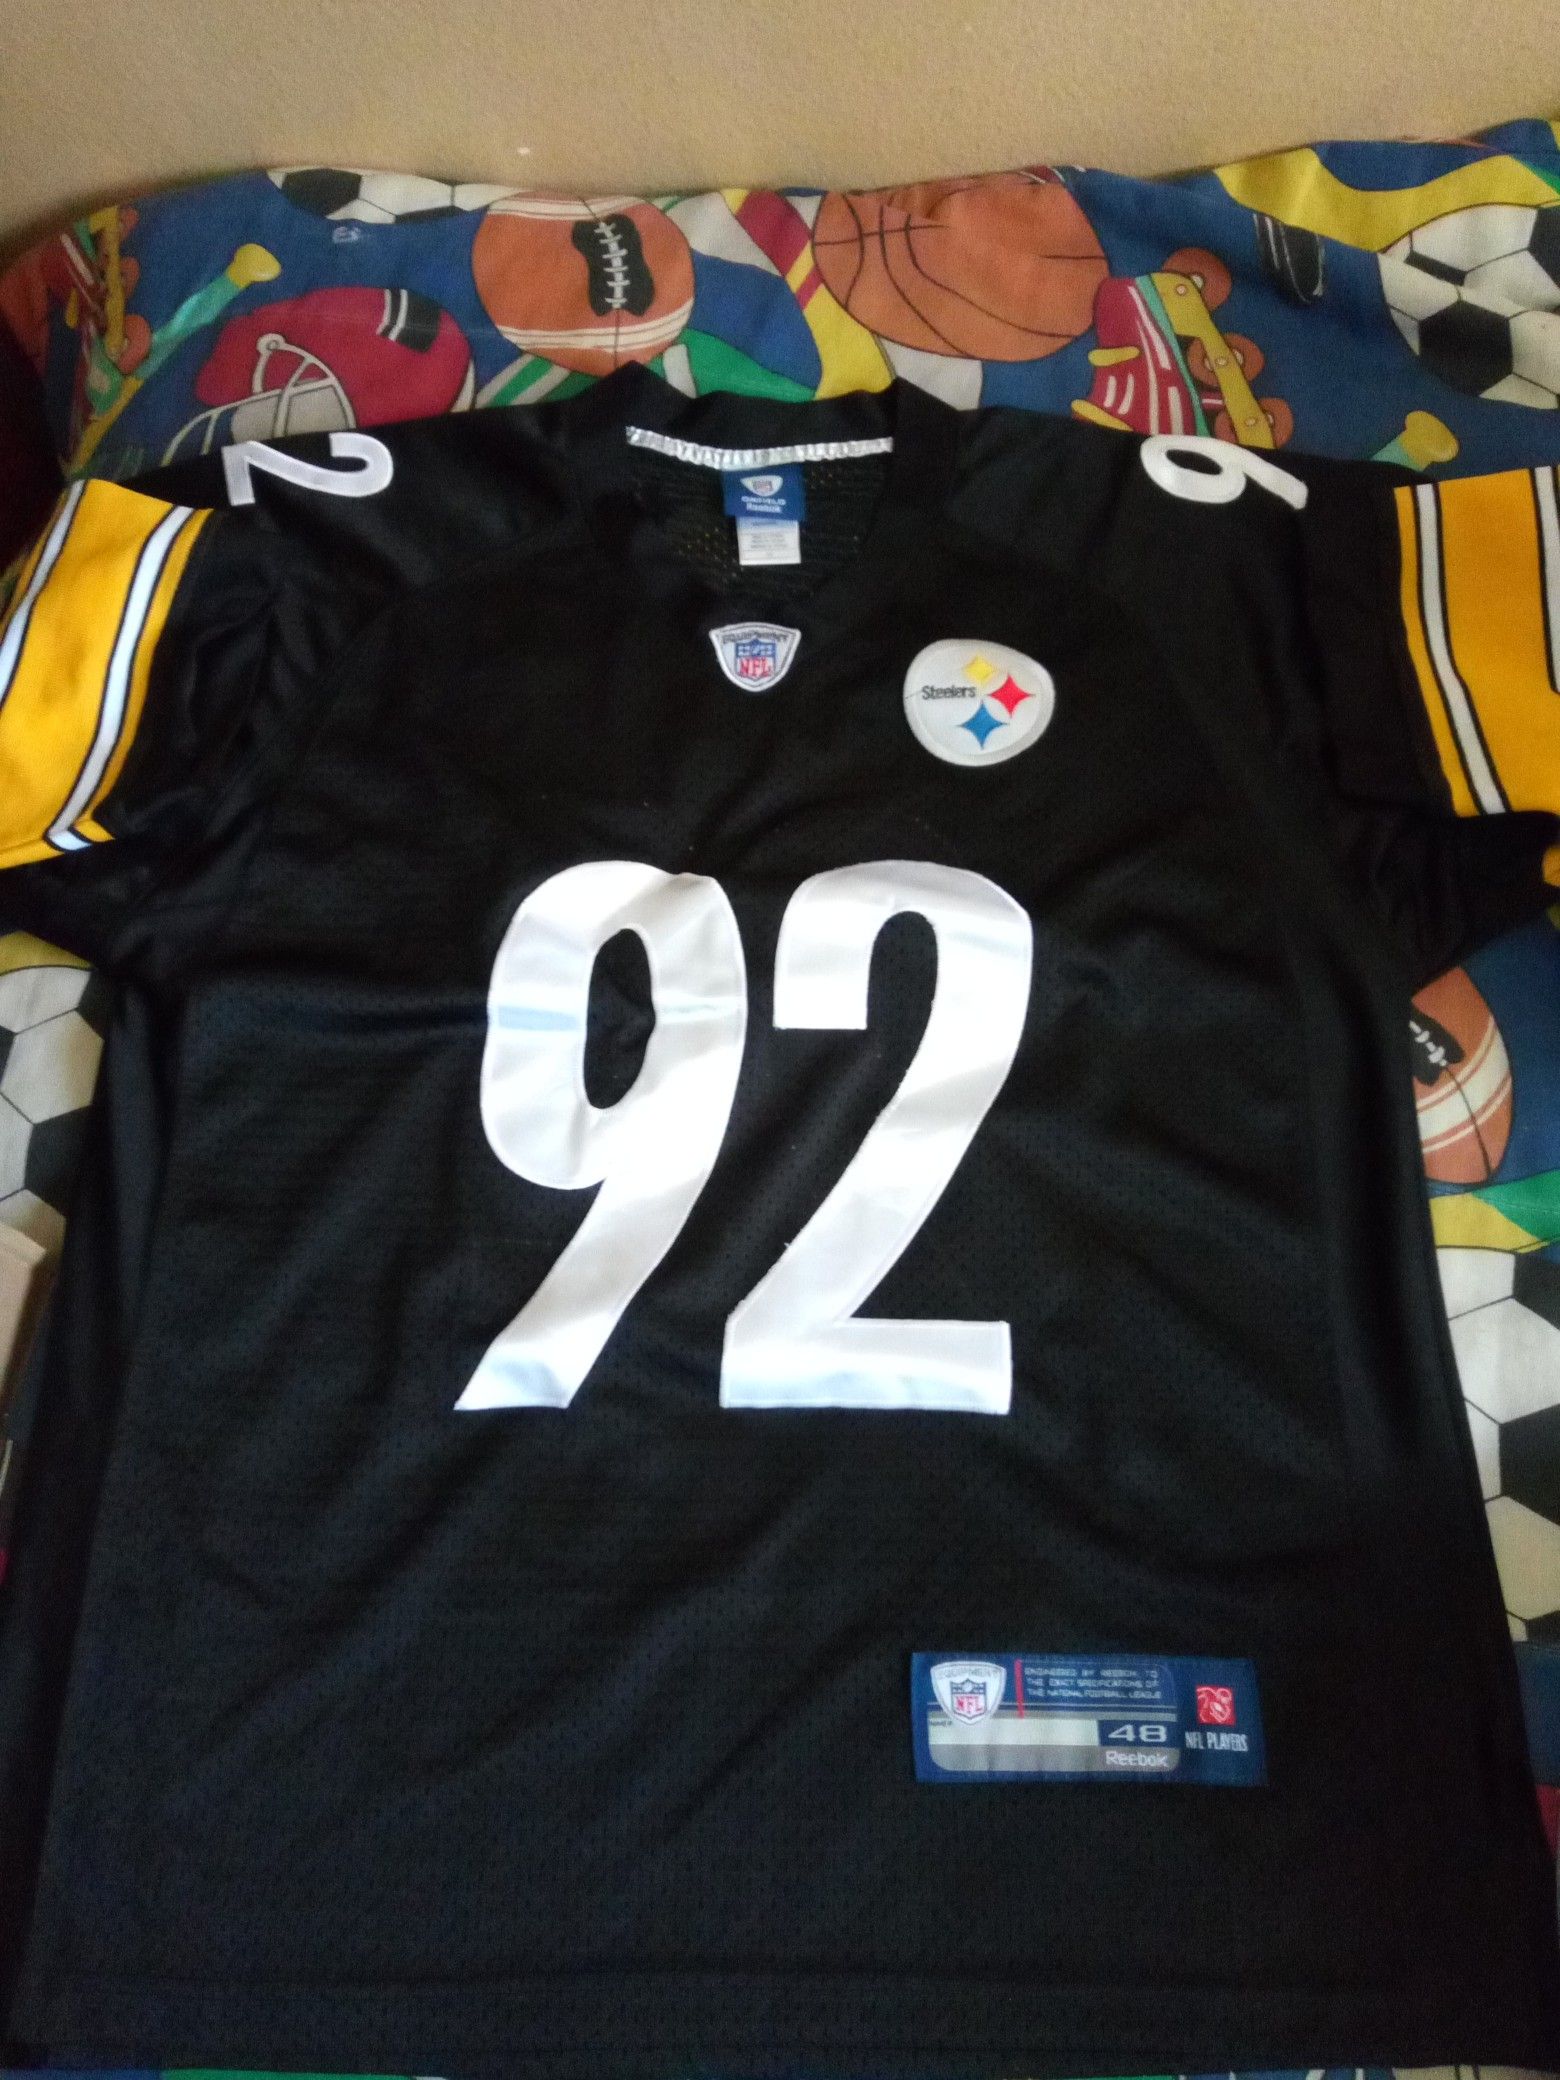 STEELERS JERSEY SIZE LARGE ADULT STITCHED